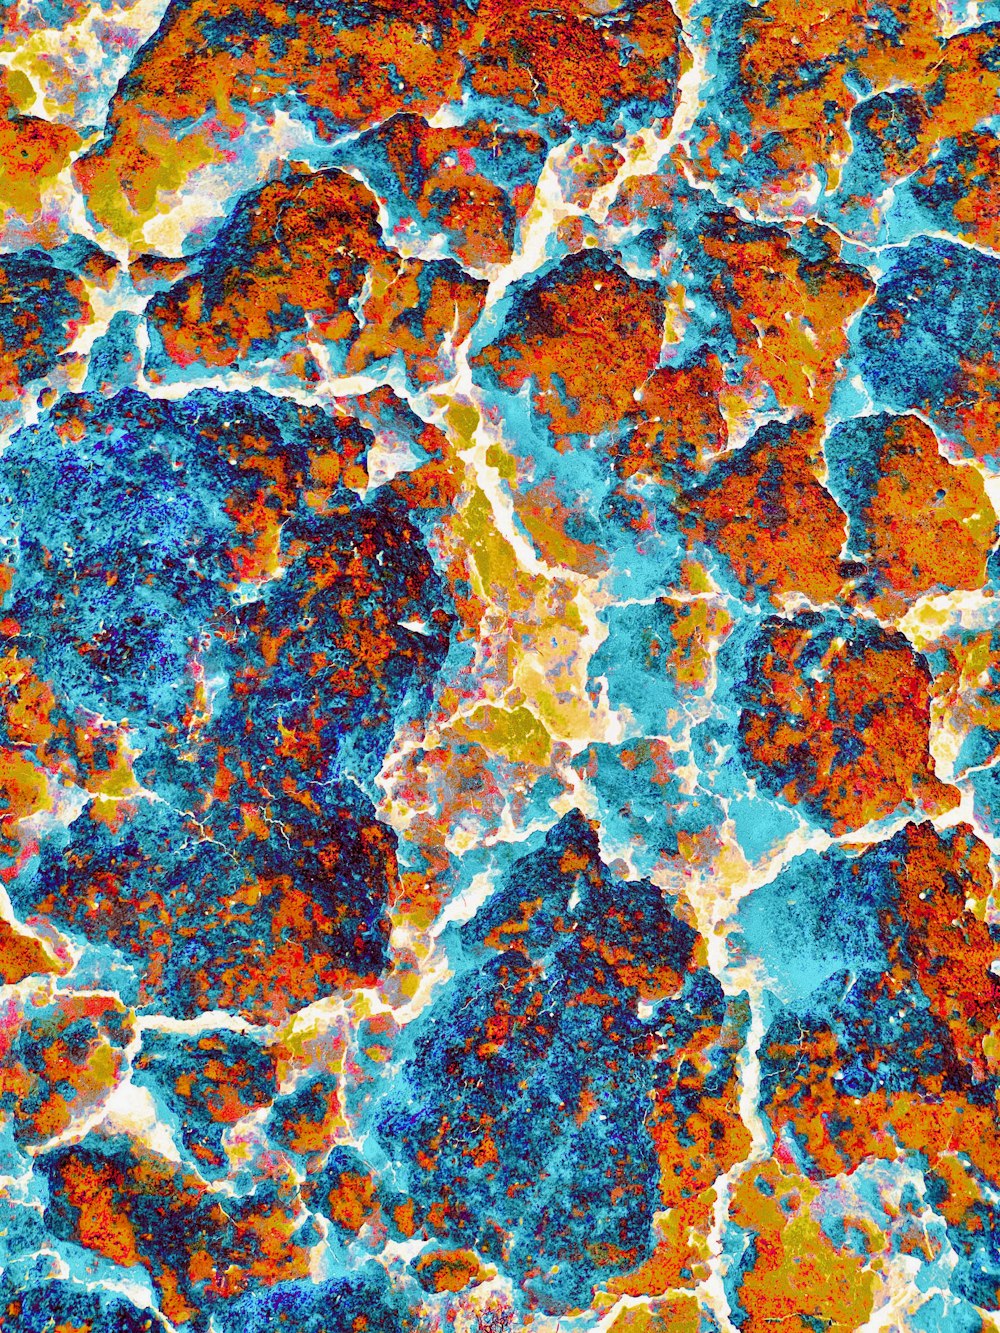 a close up of a blue and orange substance